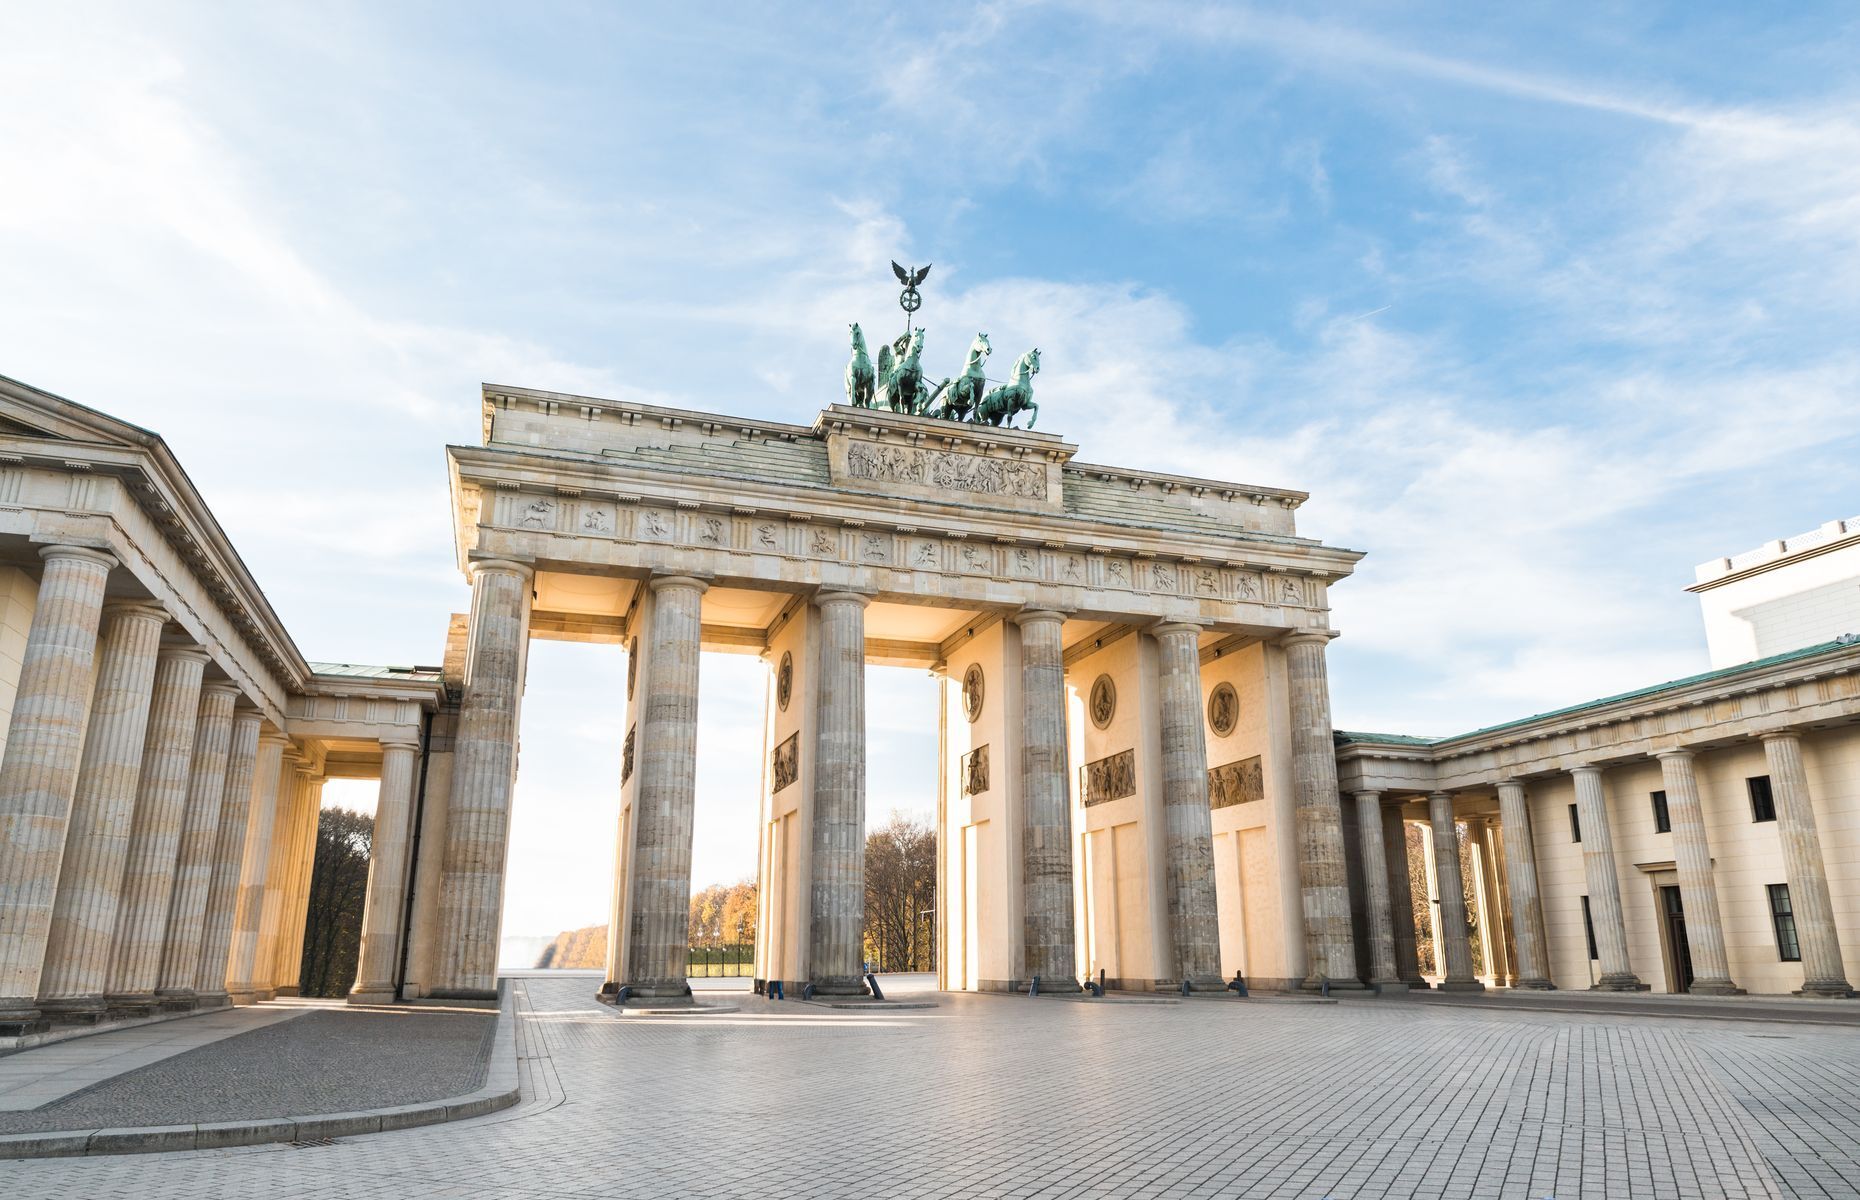 For a taste of history and culture, <a href="https://www.visitberlin.de/en" rel="noreferrer noopener">Berlin</a> is an essential stop on any trip to Germany. Shaped by the conflicts of the 20th century, the country’s official capital has many landmarks to visit, such as the poignant Holocaust Memorial, Brandenburg Gate, Reichstag, and the fascinating East Side Gallery.